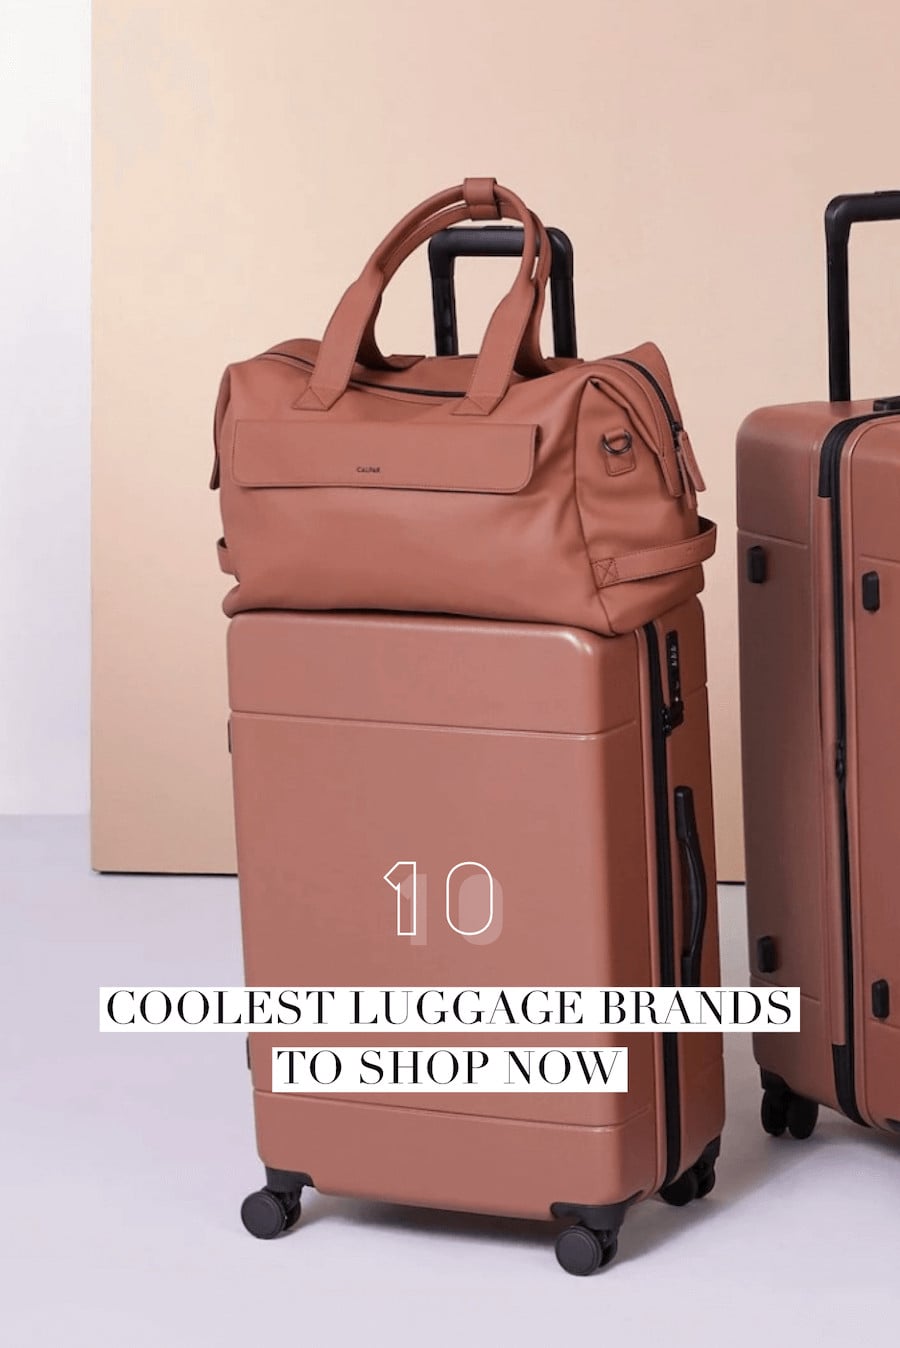 The most fashionable travel bags